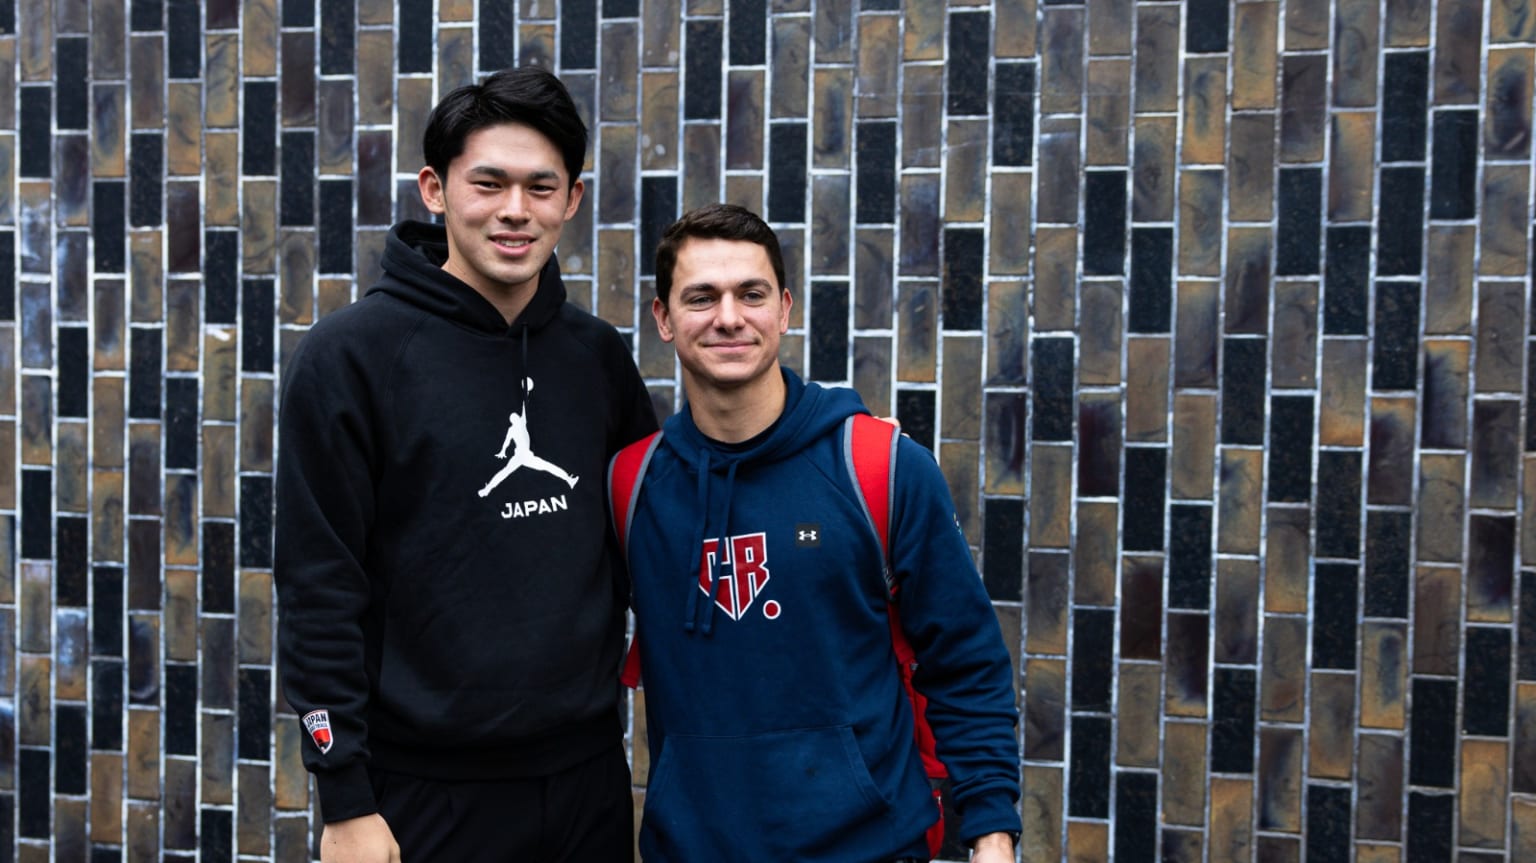 Two men in hooded sweatshirts pose together for a photo against a tiled wall